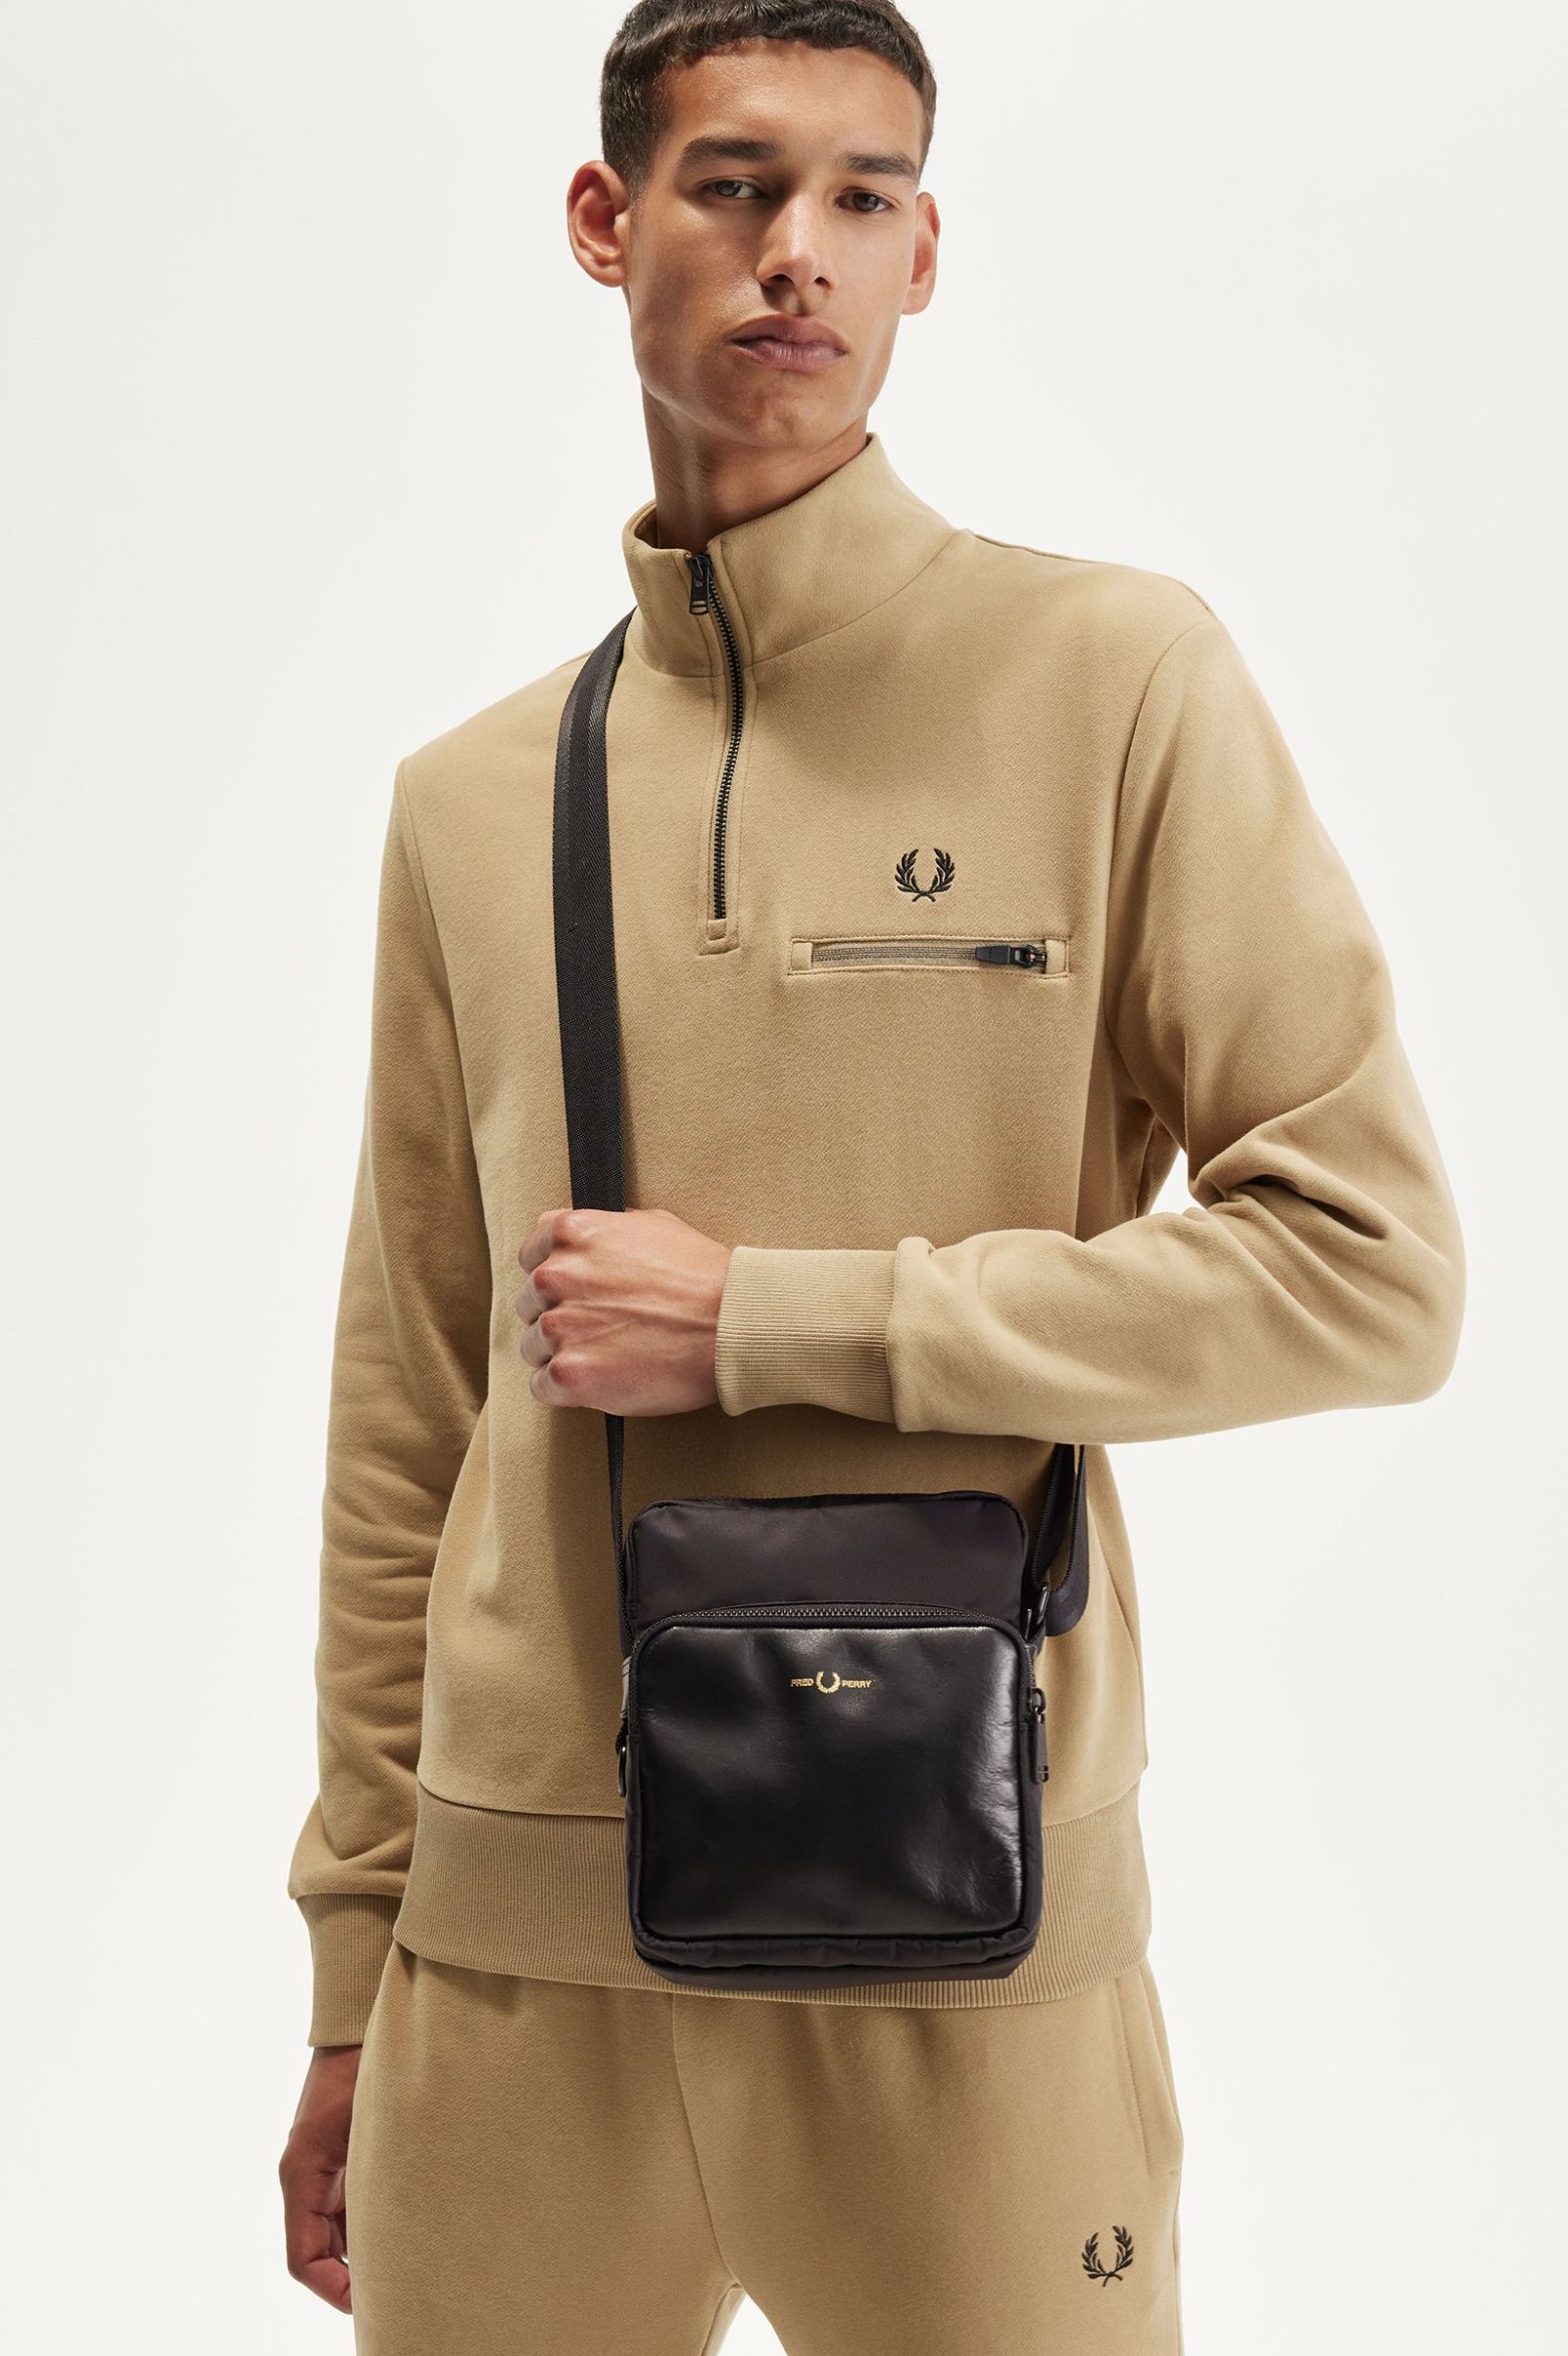 Fred Perry Nylon Twill Leather Side Bag in Black